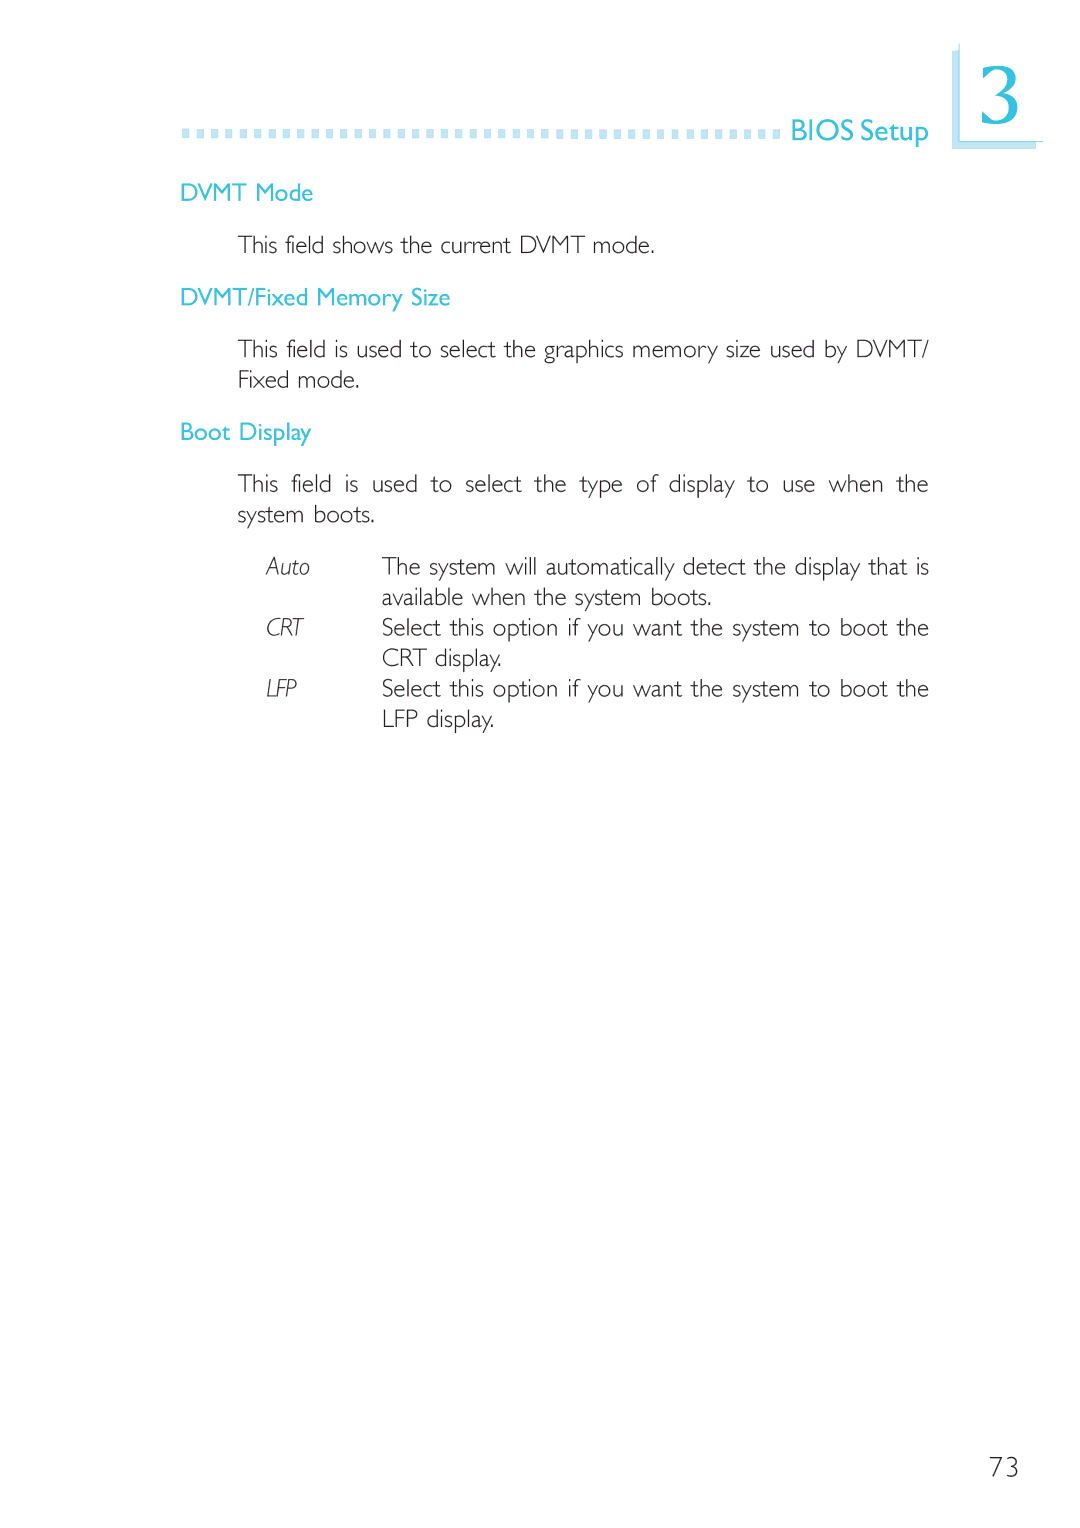 DFI 915GM-MIGF user manual Dvmt Mode, This field shows the current Dvmt mode, DVMT/Fixed Memory Size, Boot Display 